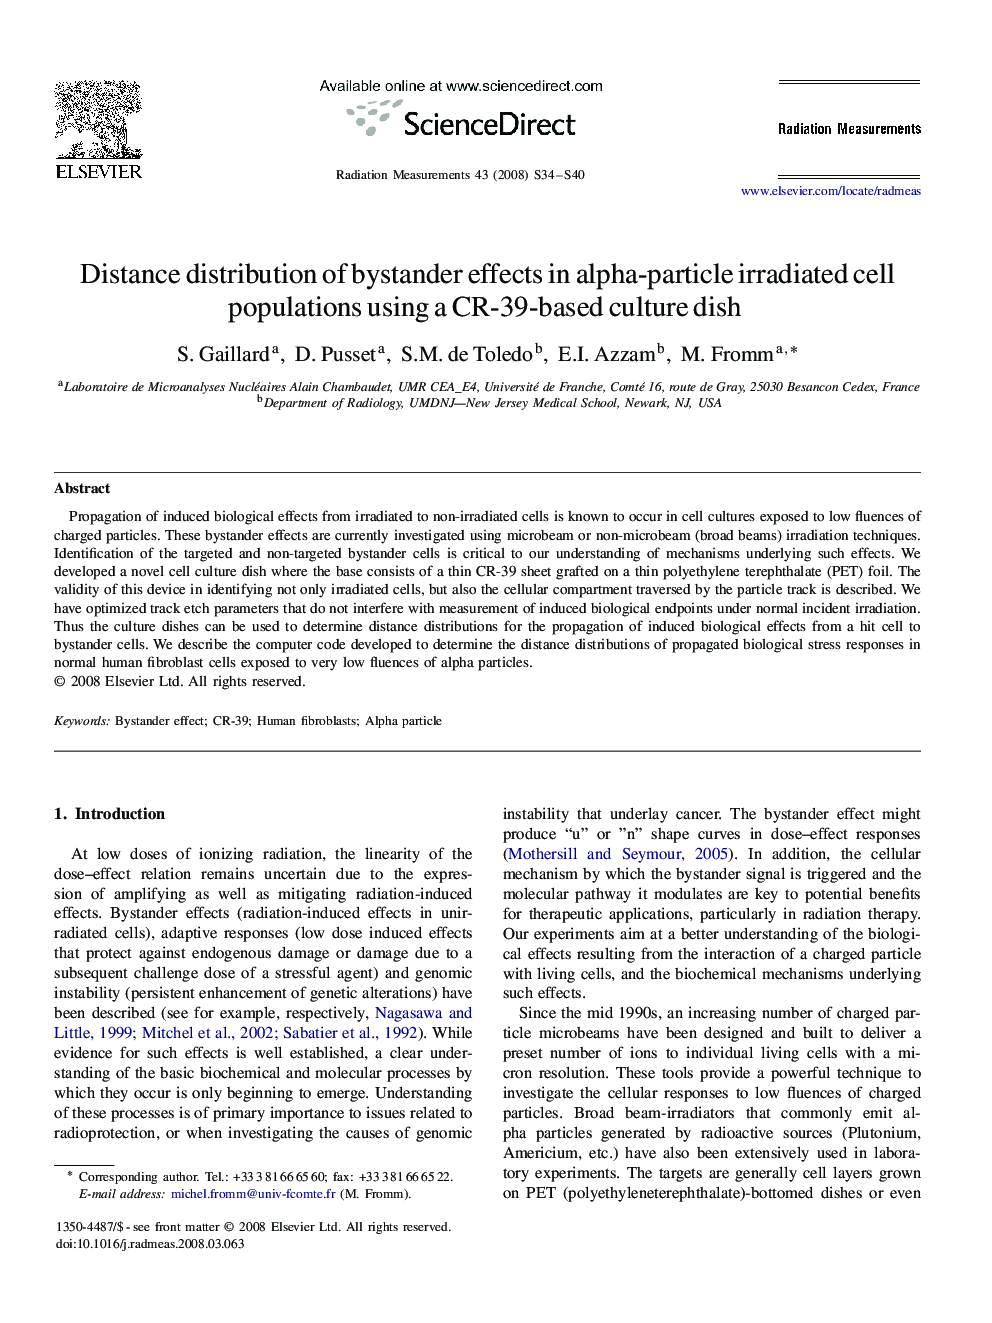 Distance distribution of bystander effects in alpha-particle irradiated cell populations using a CR-39-based culture dish